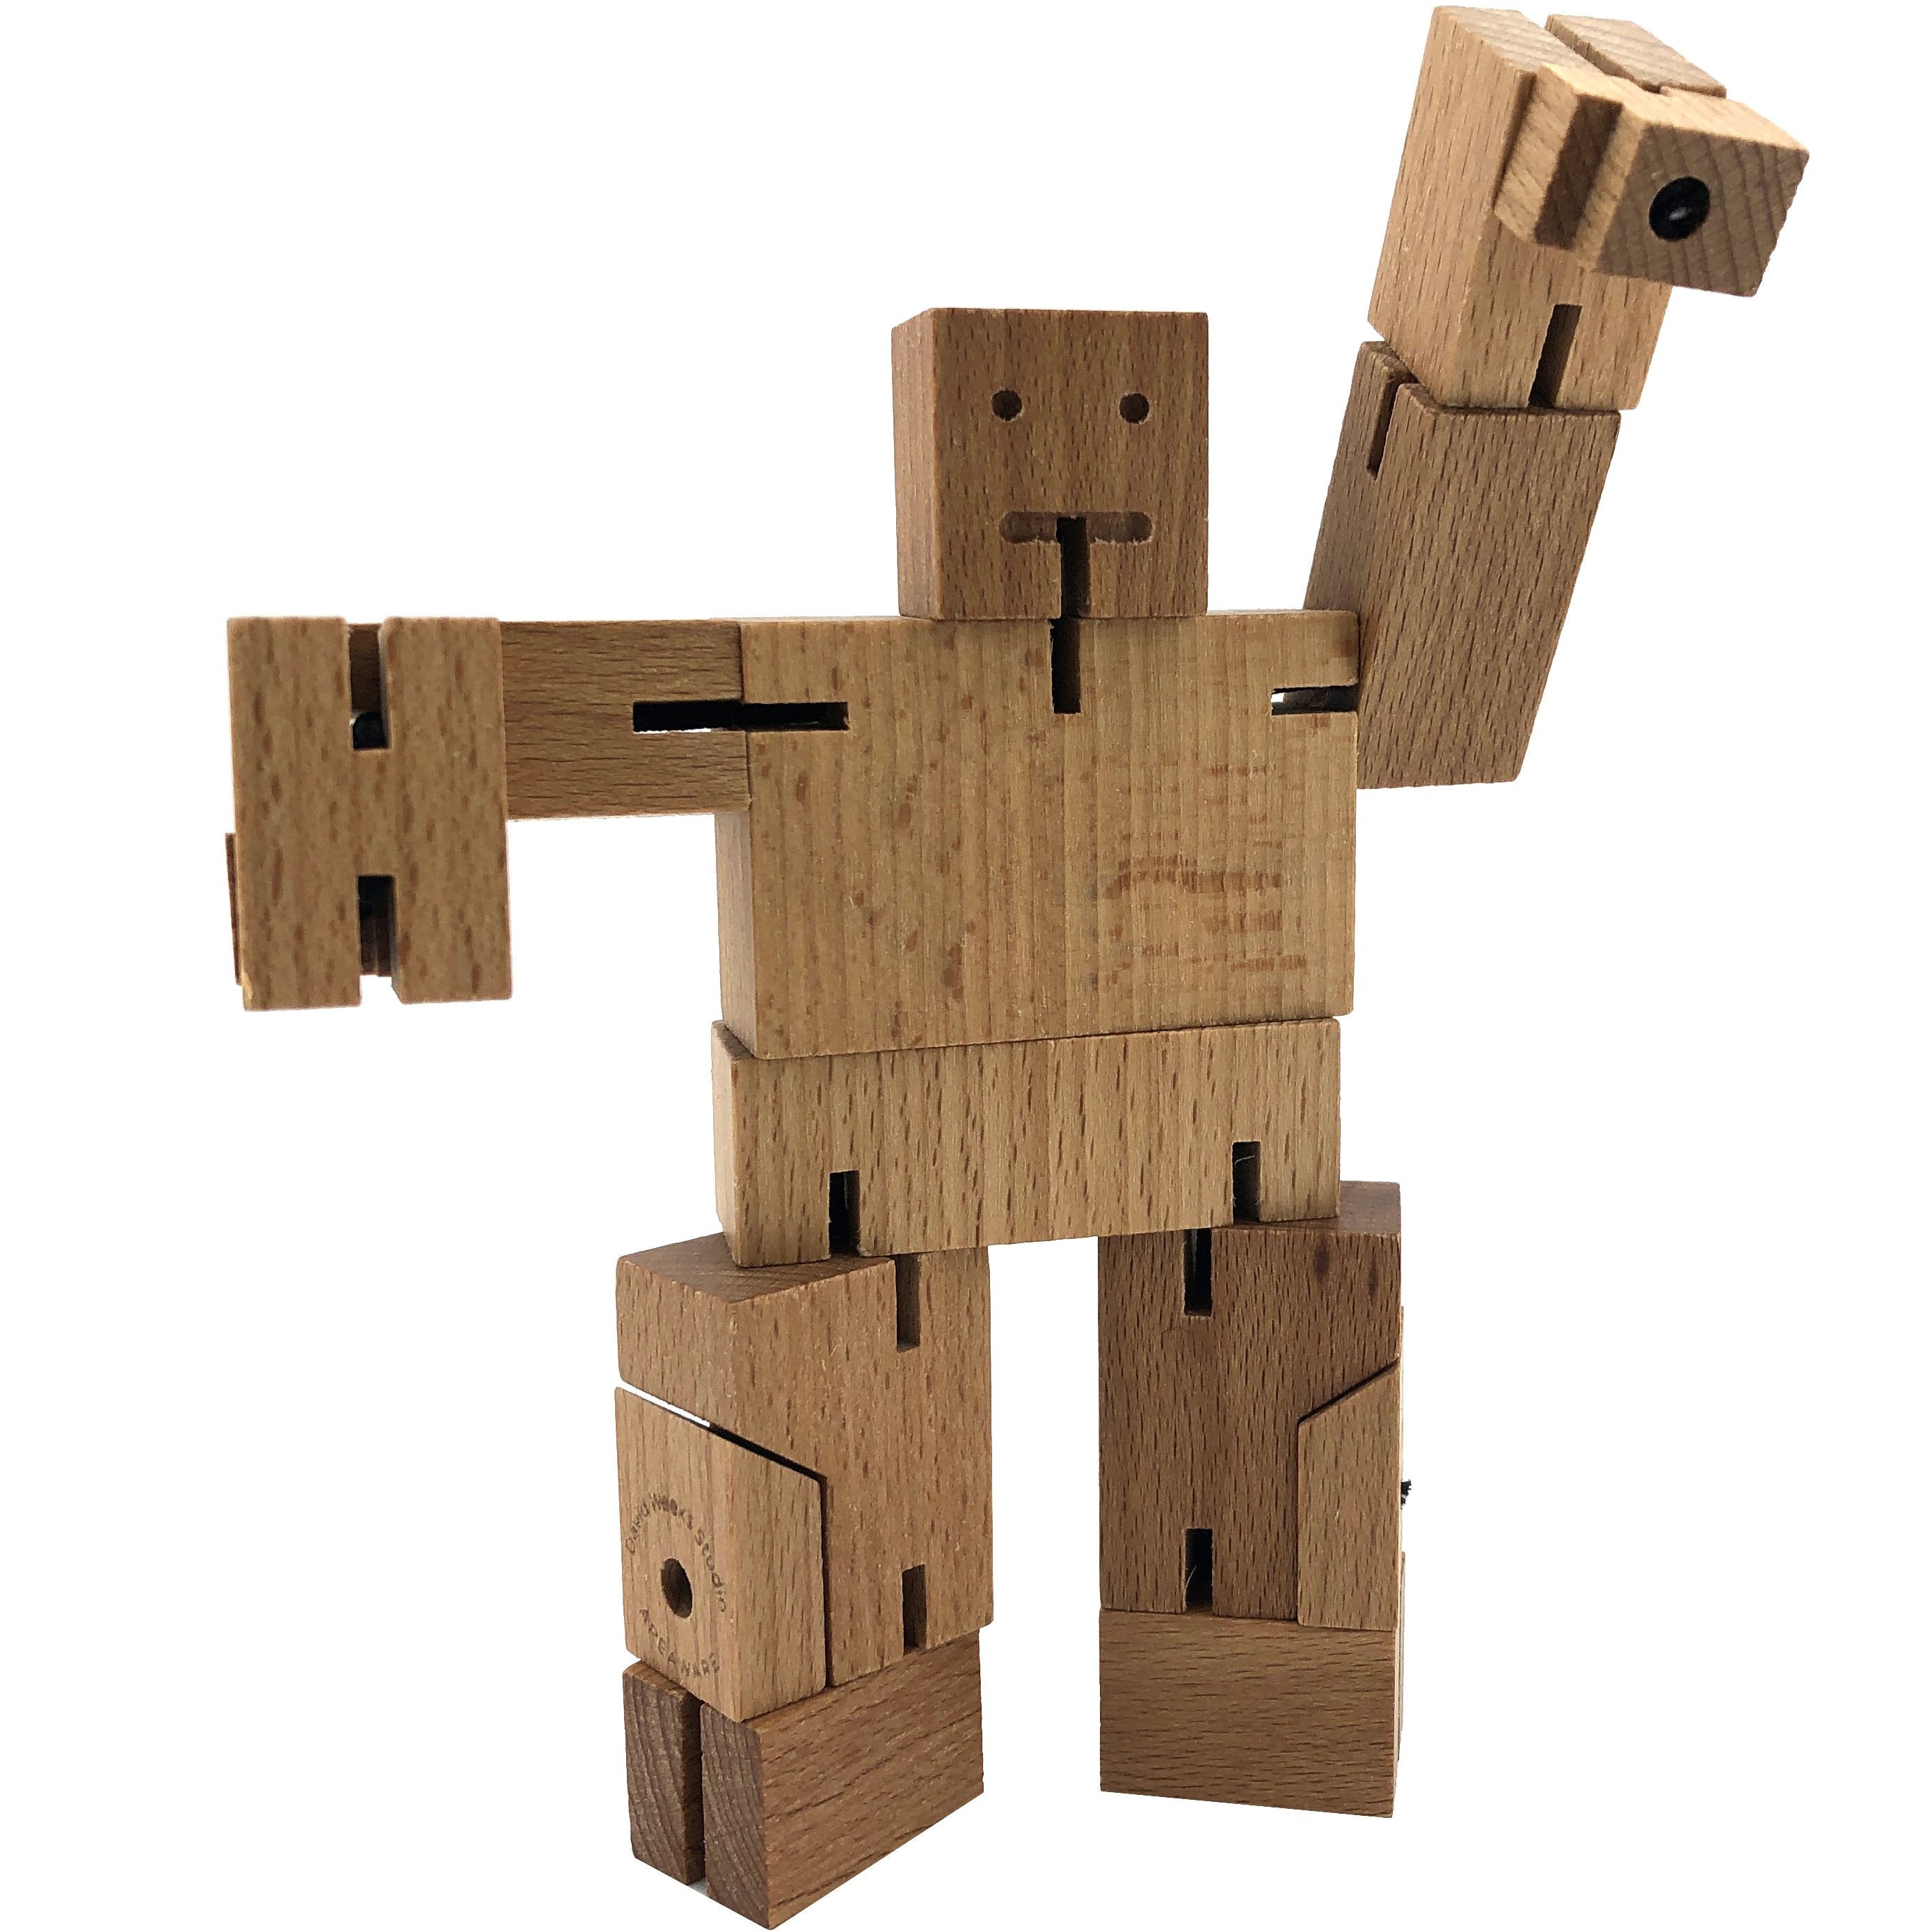 Areaware Mini Cubebot / Wooden Toy Puzzle / Natural Wood / Desk Toy